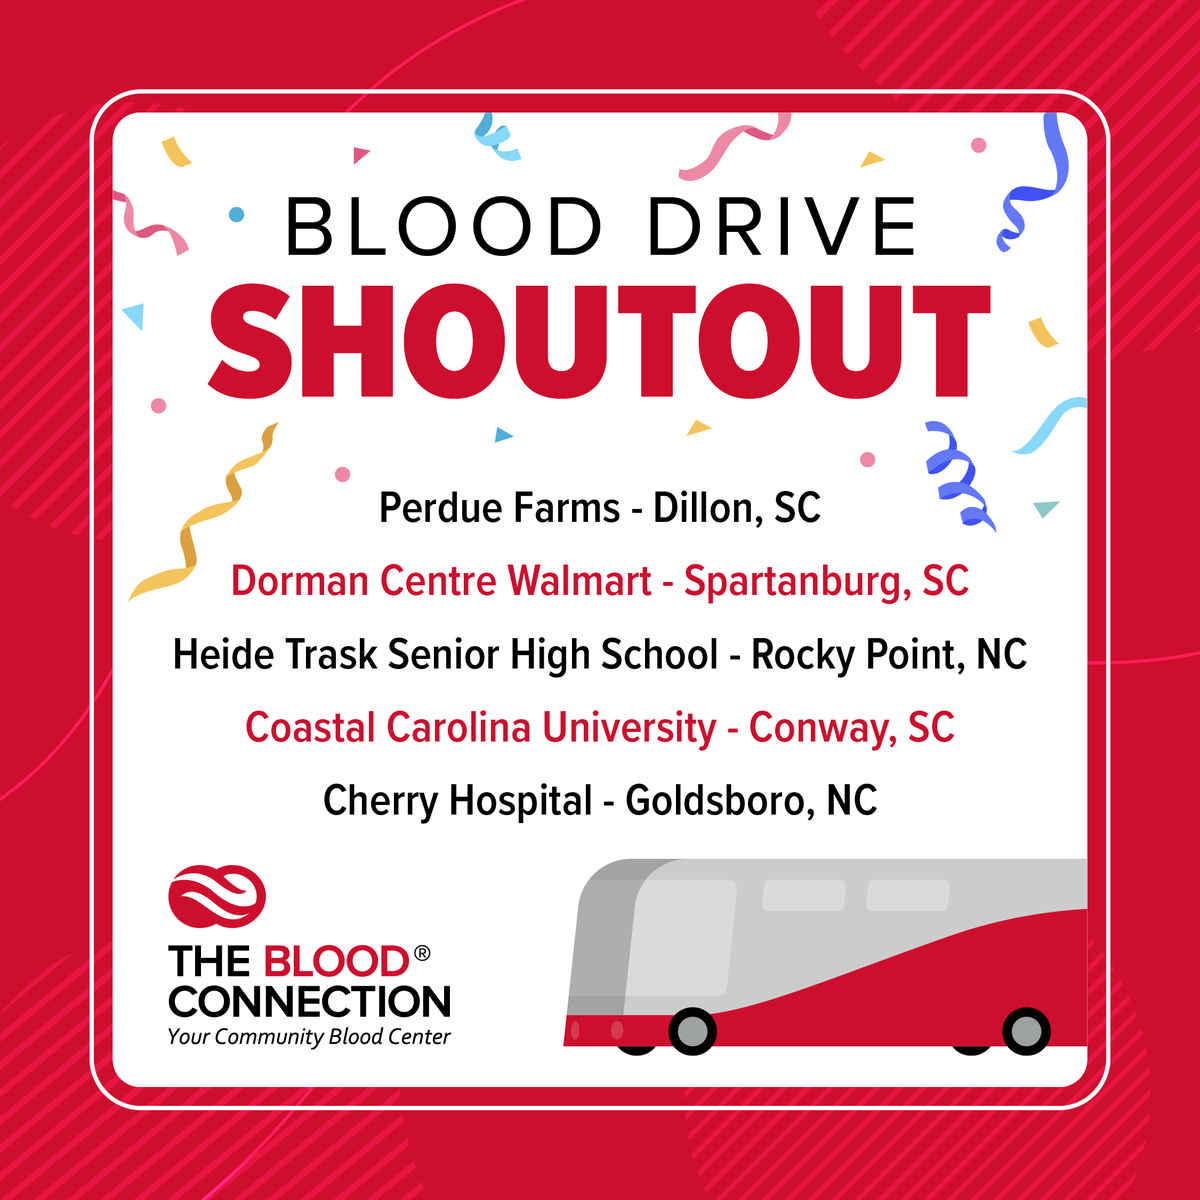 Join us in celebrating these amazing #blooddrives! 🎉 A huge shoutout to all the awesome #lifesavers who stepped up and made a difference in their community. If you participated in one of these drives, show some love ❤️ in the comments!